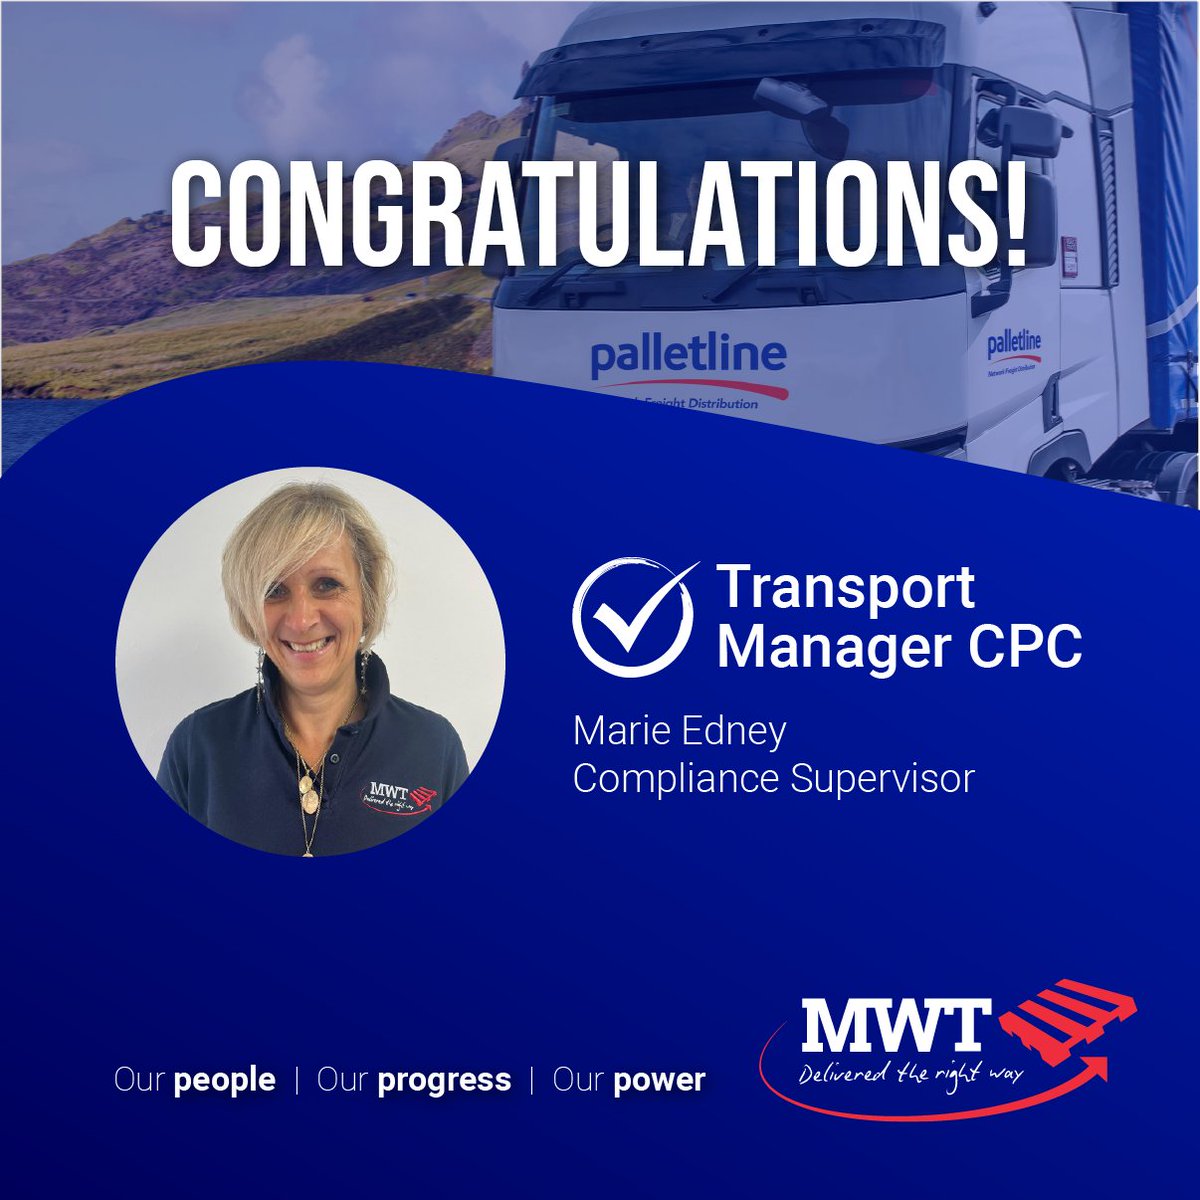 Well done to Marie Edney - Compliance Supervisor at Mike Watson Transport, for completing her Transport Manager CPC.🏅

#Transport #Logistics #TransportManager